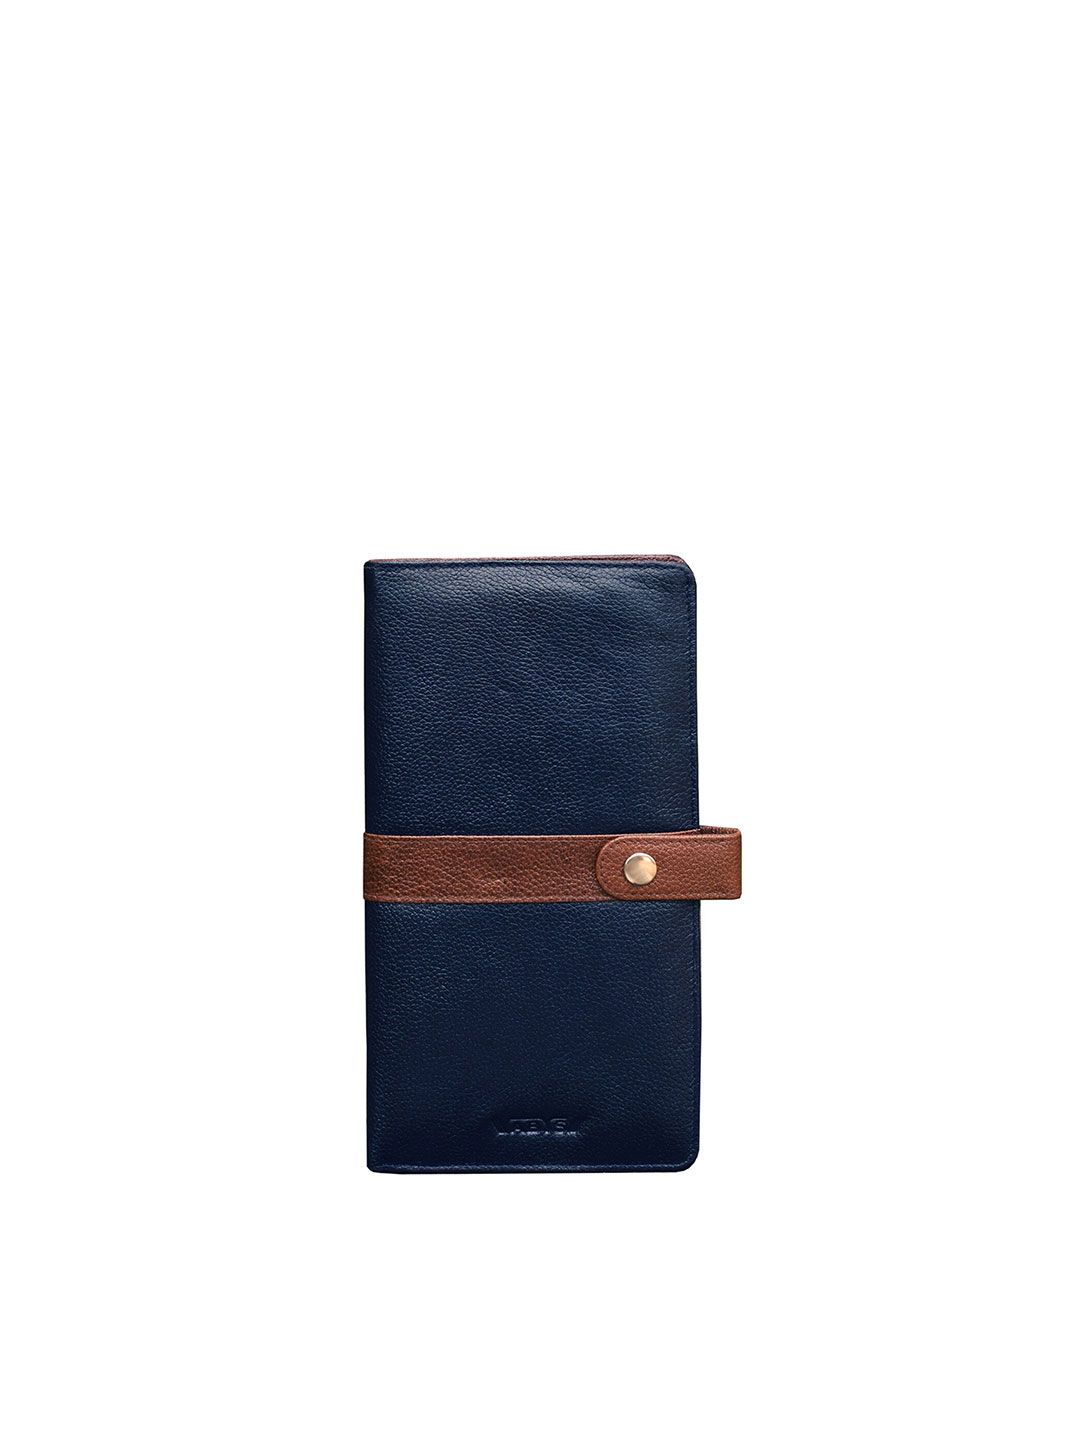 ABYS Unisex Blue & Brown Solid Leather Passport Holder Price in India